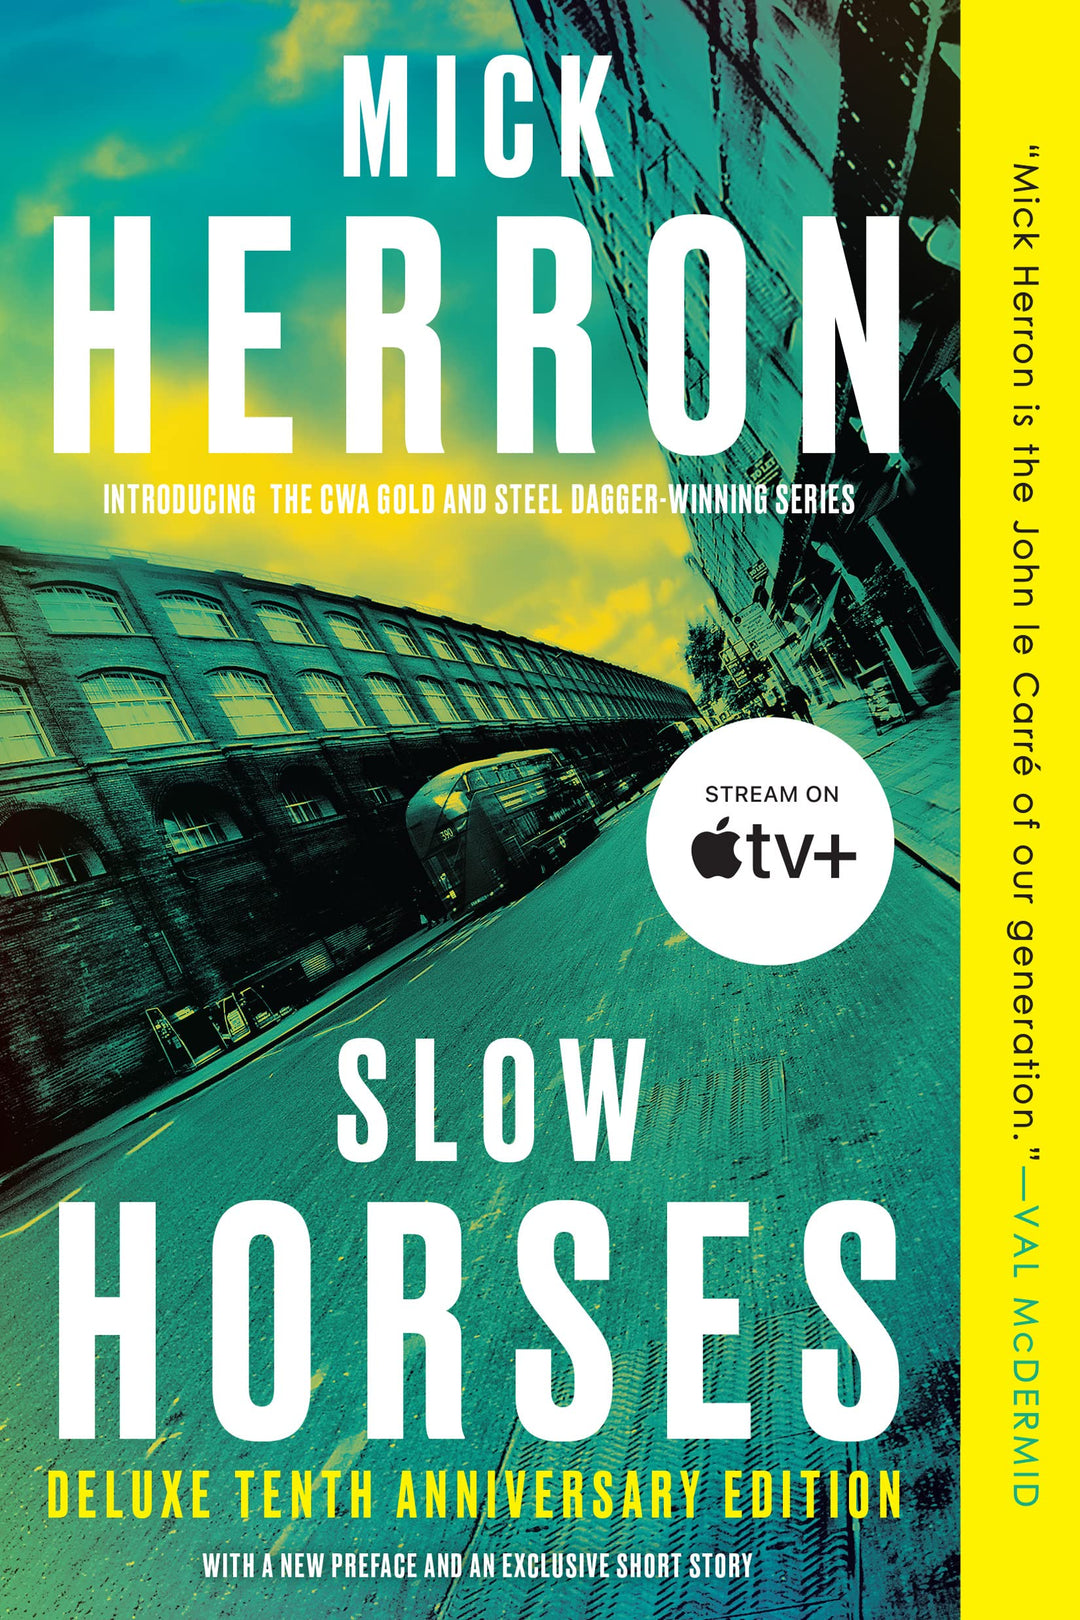 Slow Horses (Deluxe Edition) (Slough House) by Mick Herron